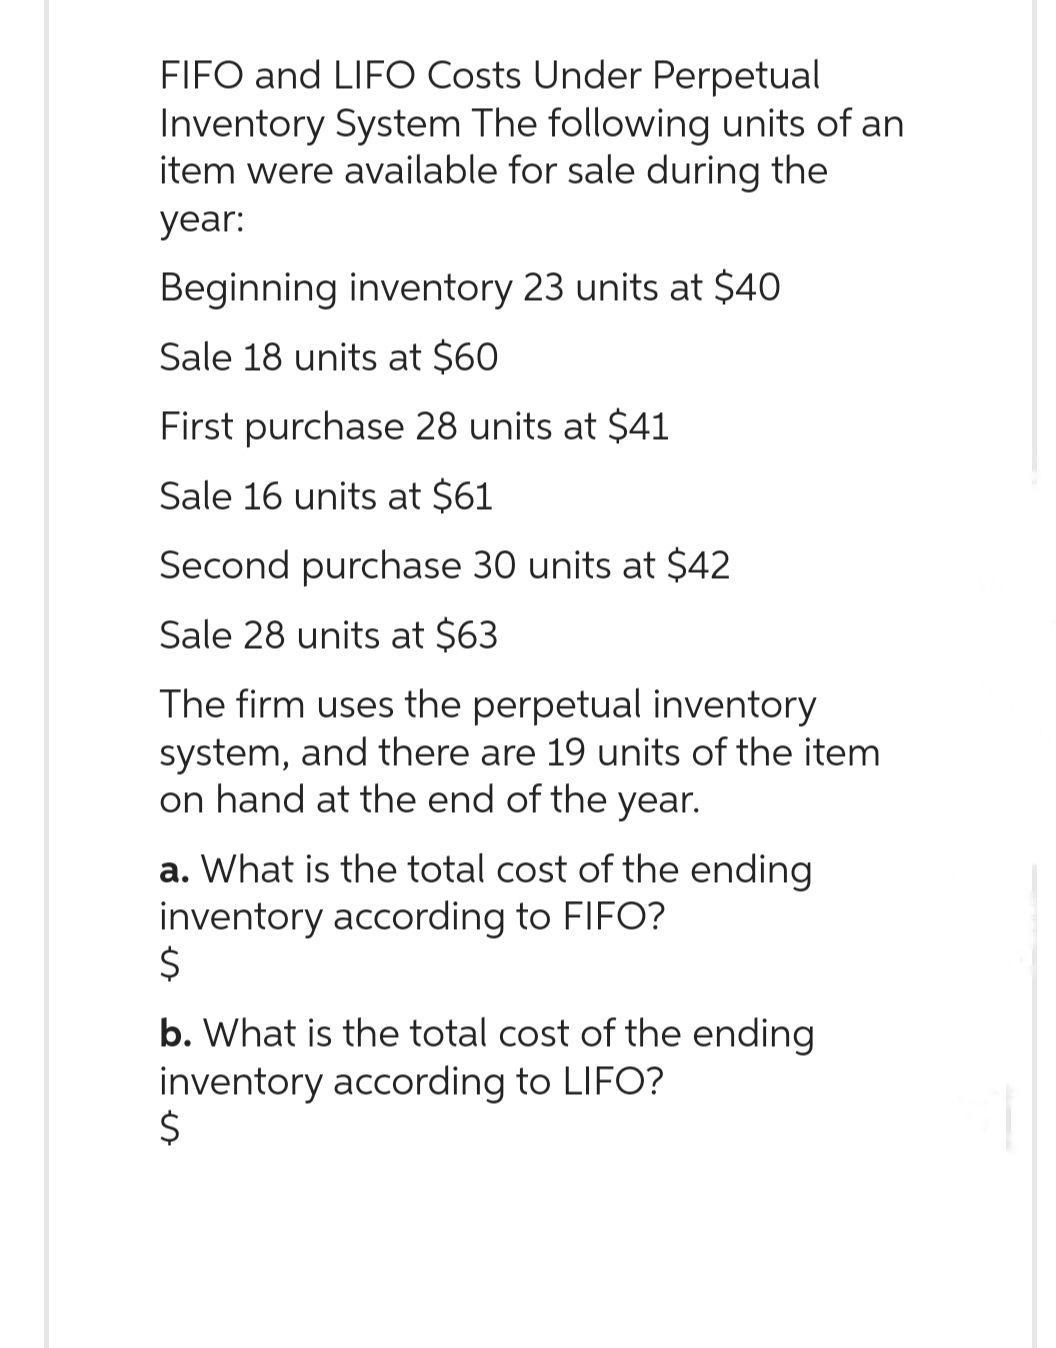 FIFO and LIFO Costs Under Perpetual
Inventory System The following units of an
item were available for sale during the
year:
Beginning inventory 23 units at $40
Sale 18 units at $60
First purchase 28 units at $41
Sale 16 units at $61
Second purchase 30 units at $42
Sale 28 units at $63
The firm uses the perpetual inventory
system, and there are 19 units of the item
on hand at the end of the year.
a. What is the total cost of the ending
inventory according to FIFO?
Ś
b. What is the total cost of the ending
inventory according to LIFO?
$